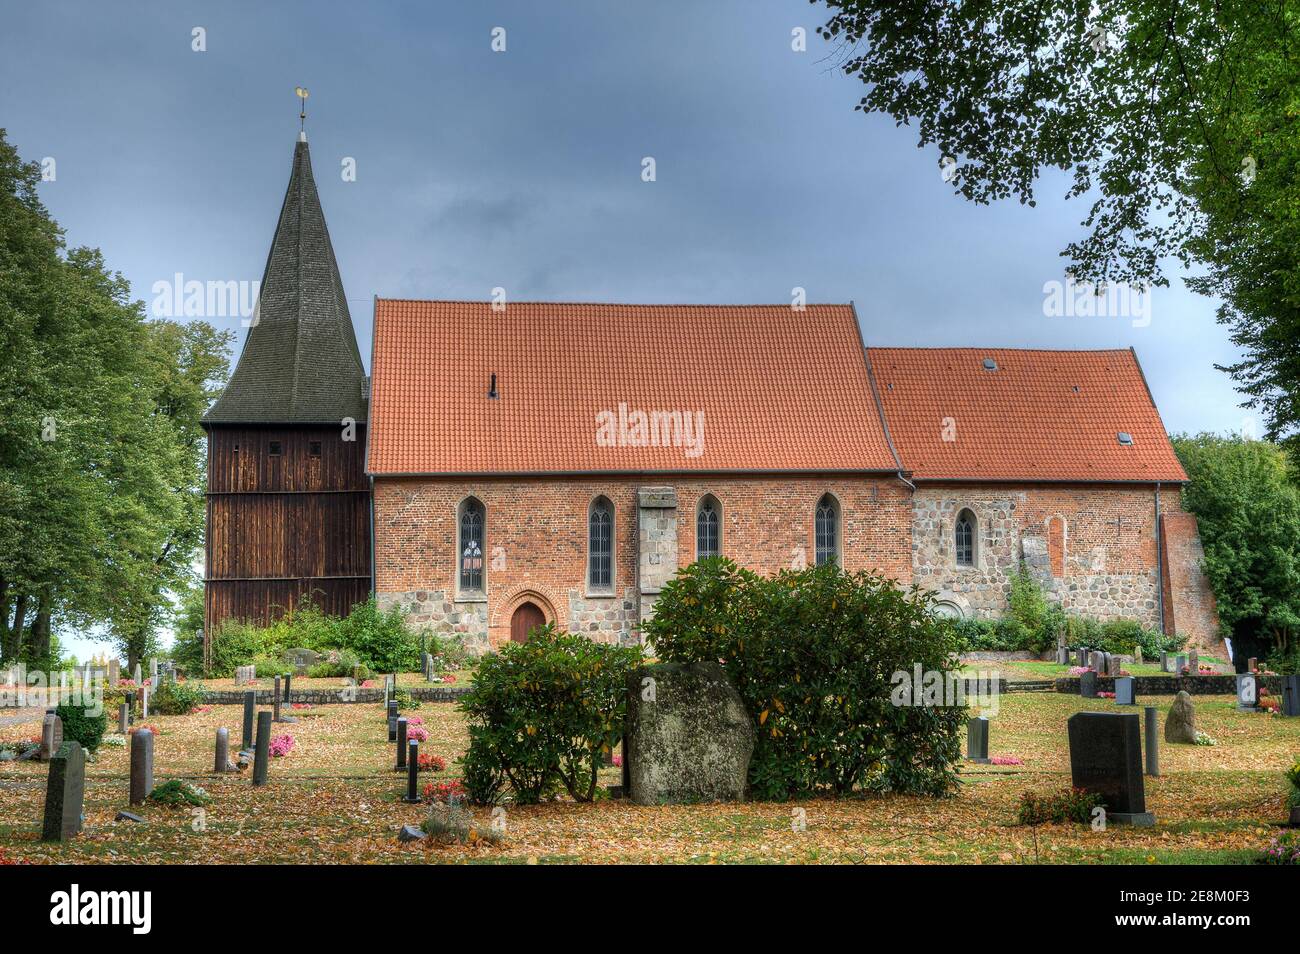 The Mustin Church is one of the oldest village churches in the Launeburg region. Stock Photo